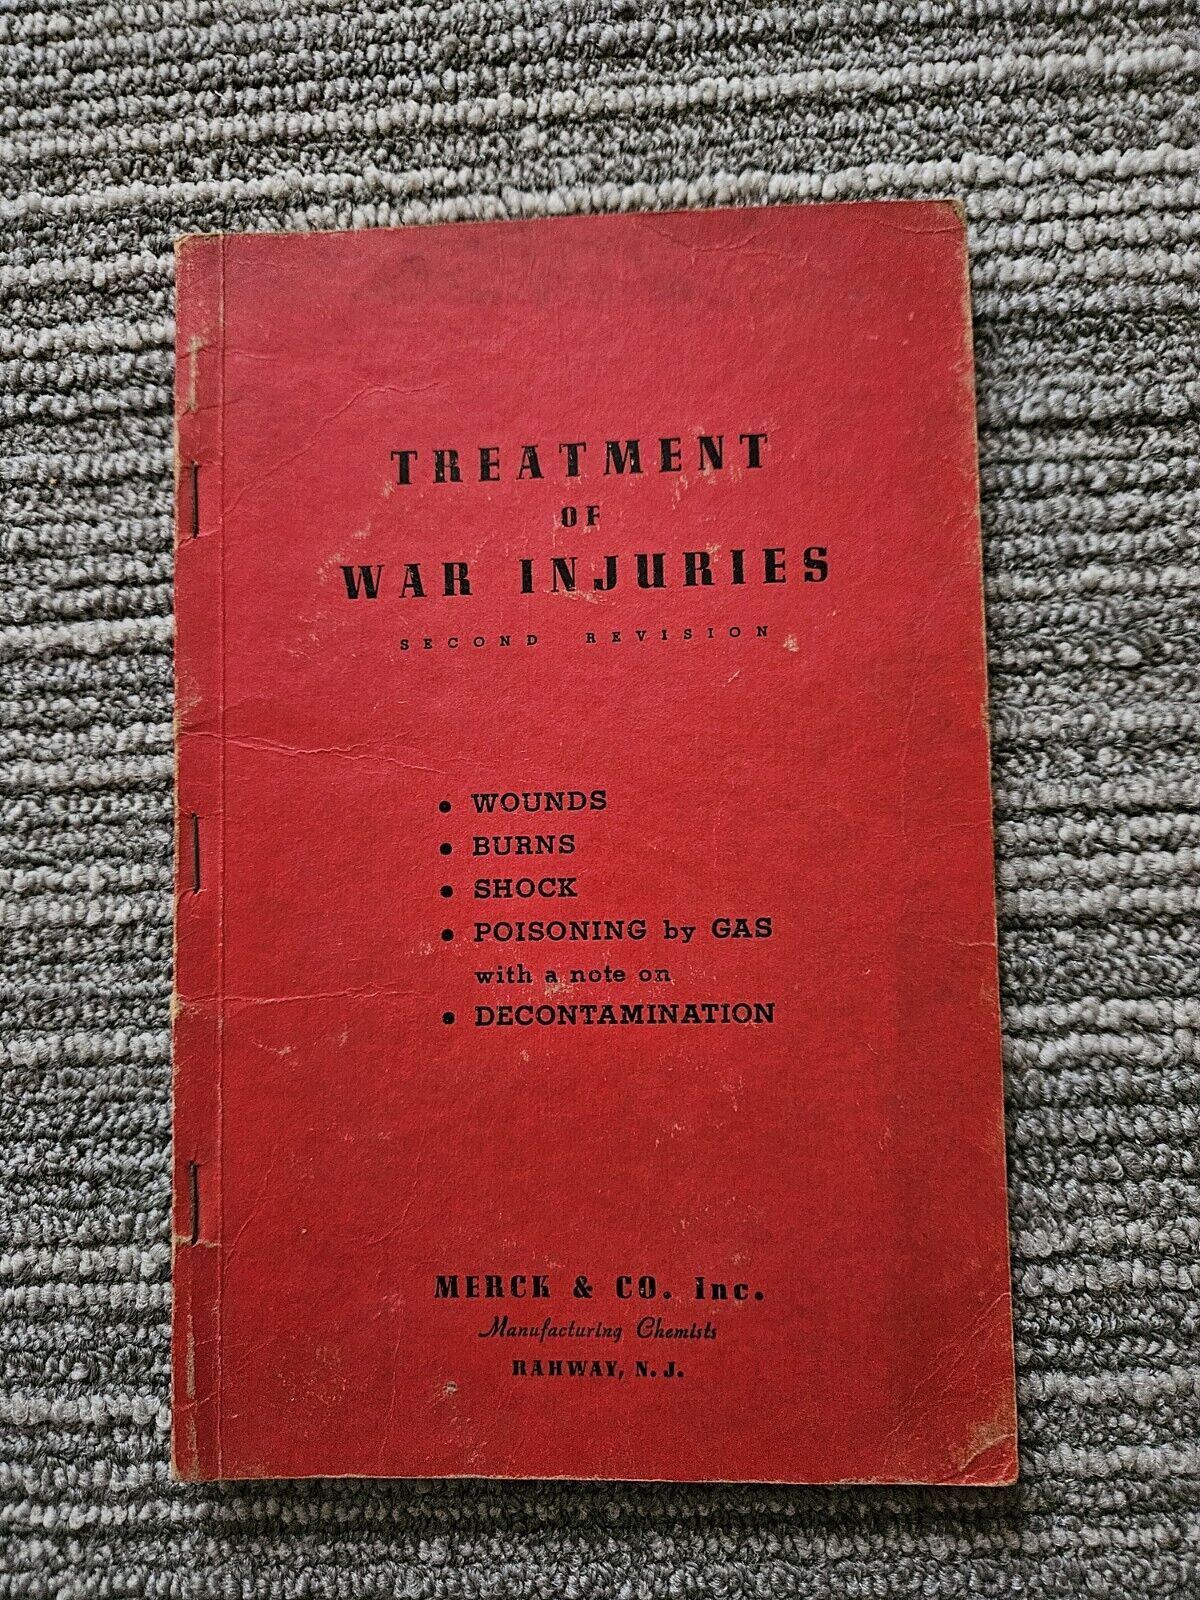 Treatment of War Injuries. Second Edition